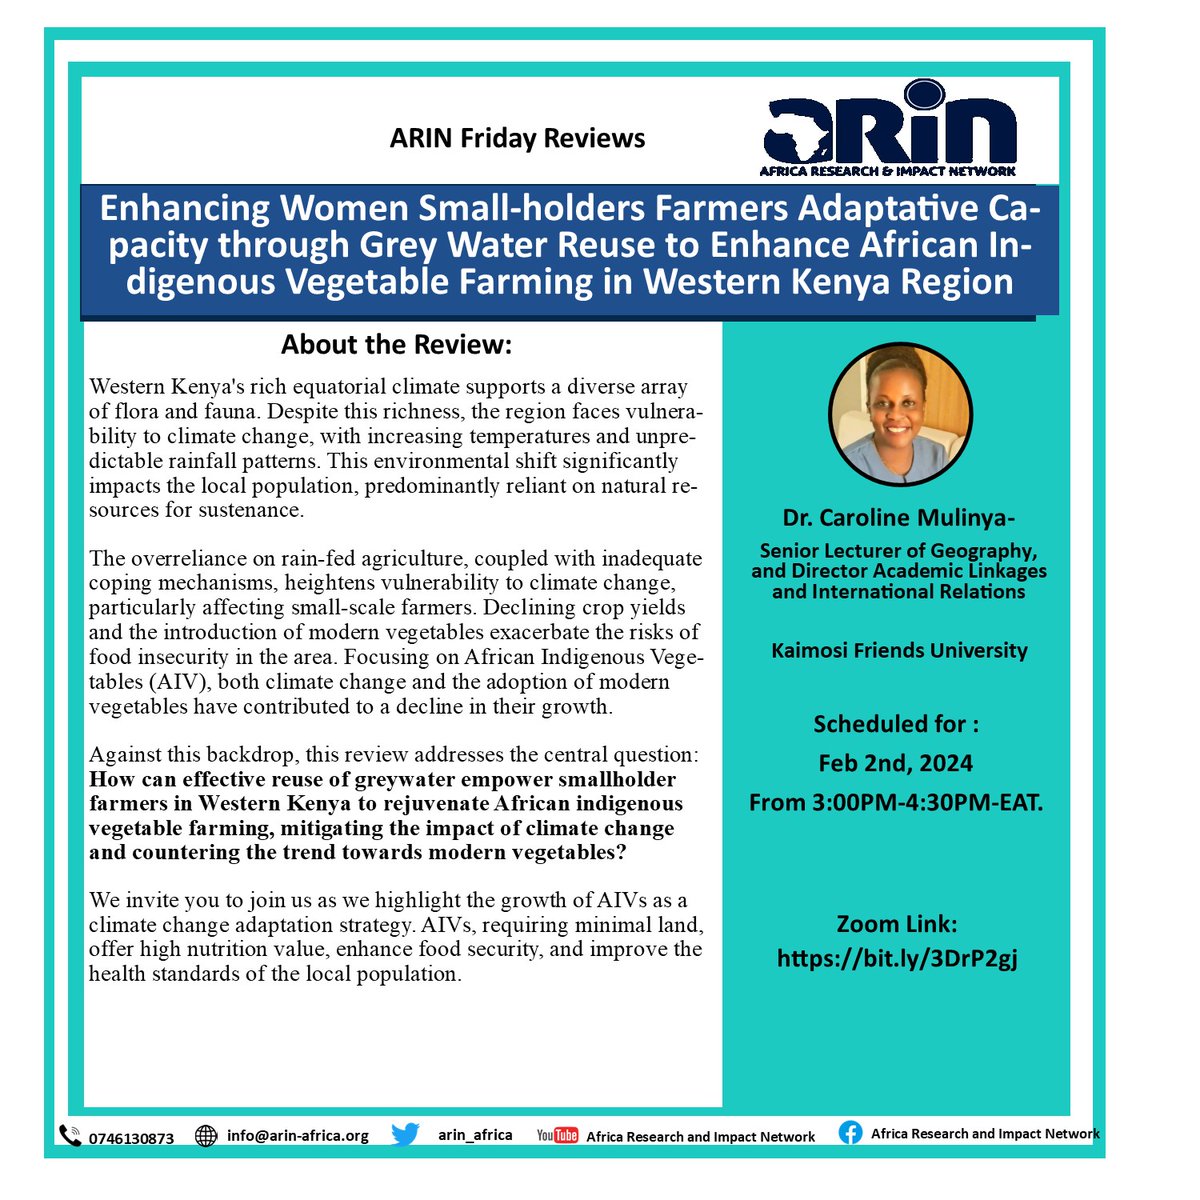 Africa, a continent rich in biodiversity, is at the frontline of #climatechange impacts. #Greywater reuse can be a game-changer for #smallholder farmers. Join our #ARINFridayReviews for this insightful discussion on Feb 2, from 3pm to 4.30pm Link: shorturl.at/txDW3